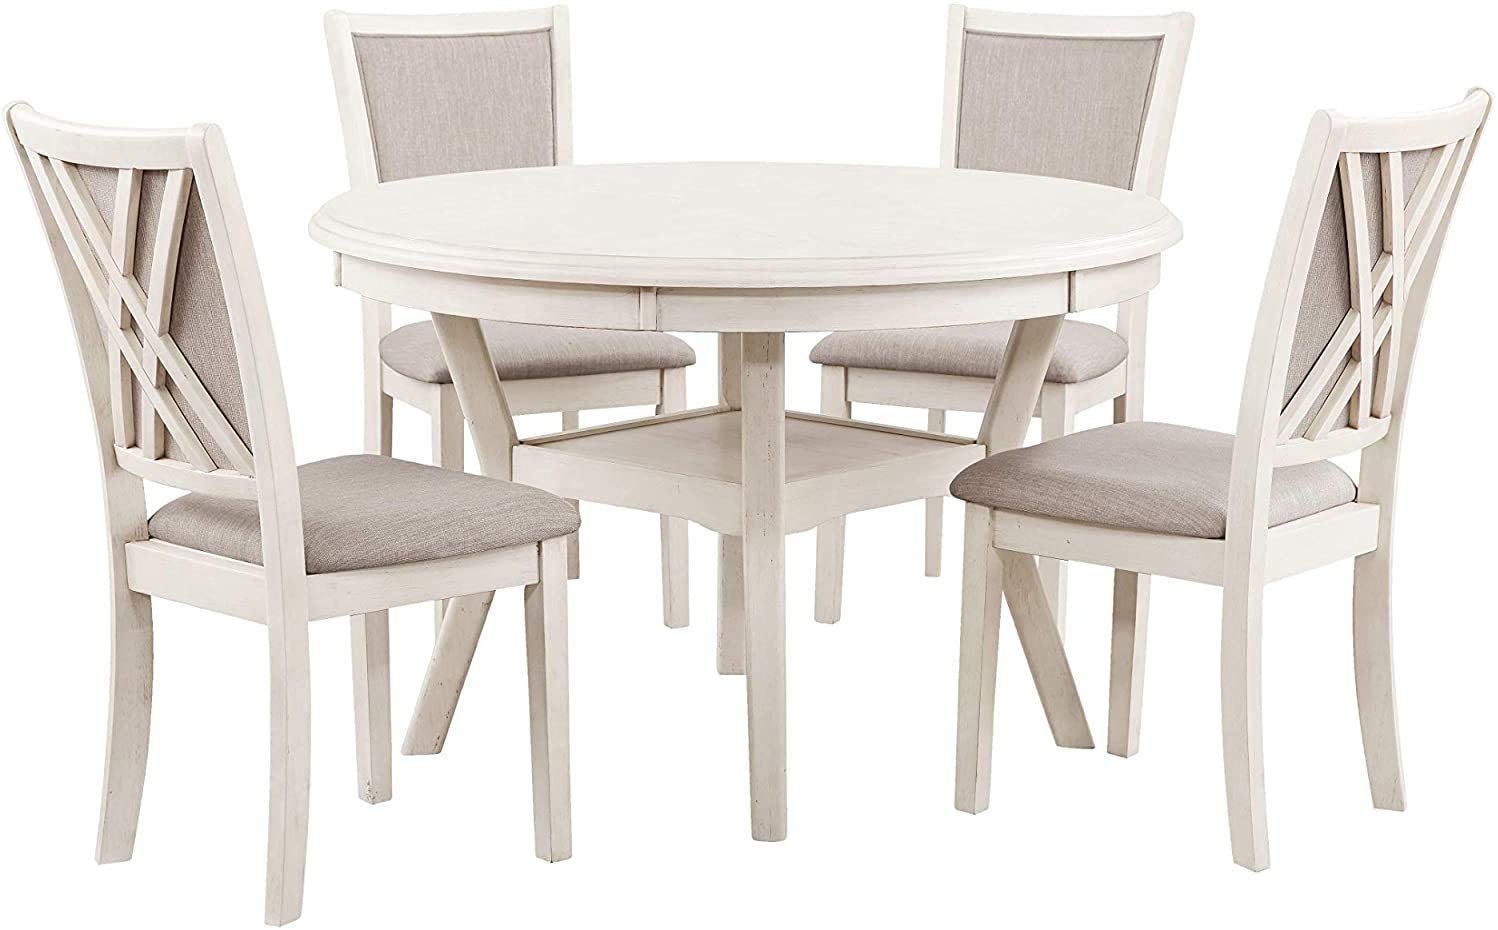 Bisque Color Classic 5-Piece Dining Table Set 